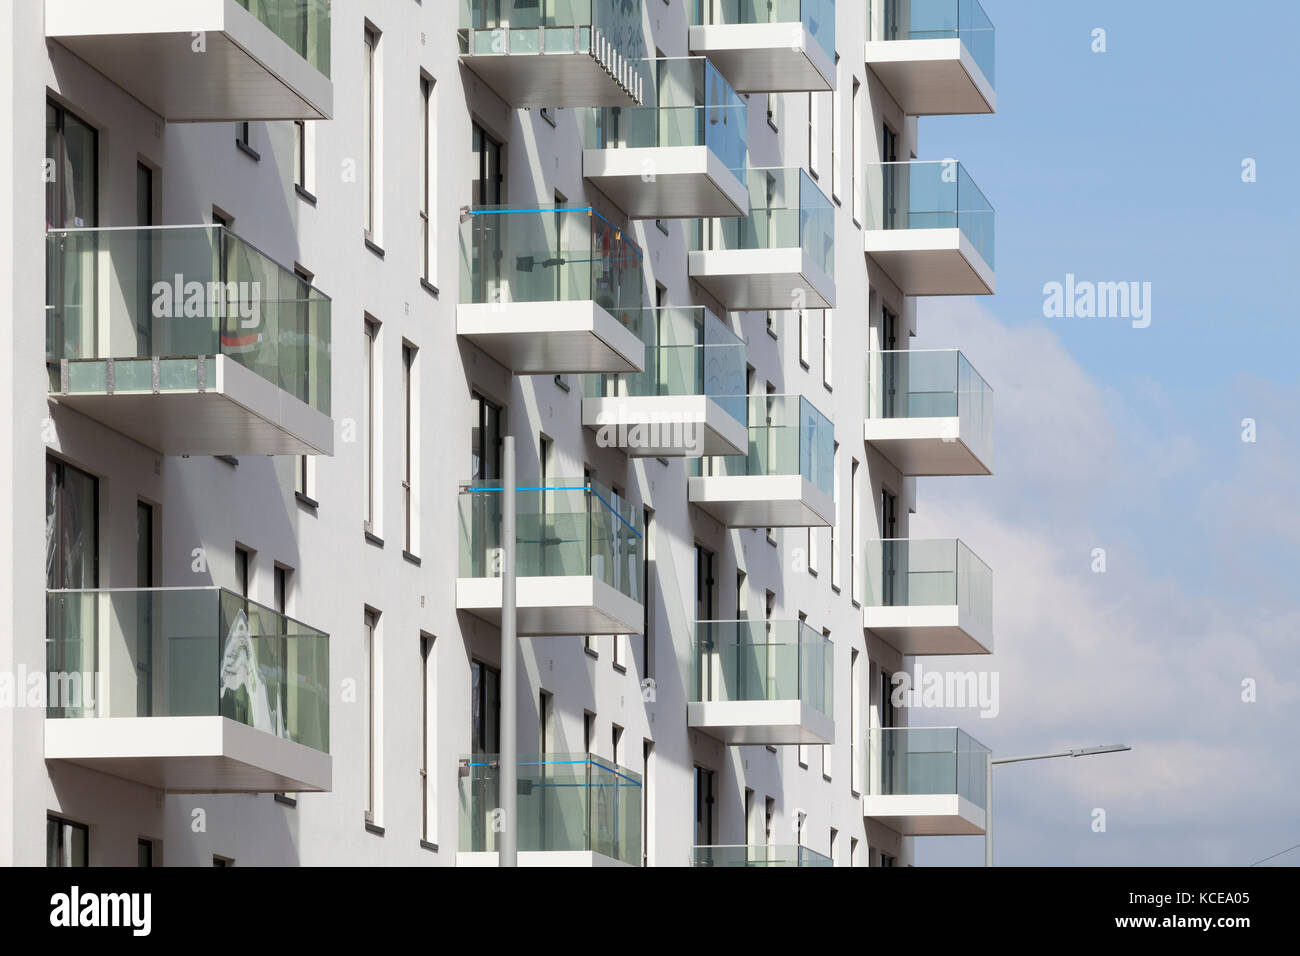 Exterior view of balconies of an apartment building as part of the Greenwich Peninsula Redevelopment, London, UK. Stock Photo